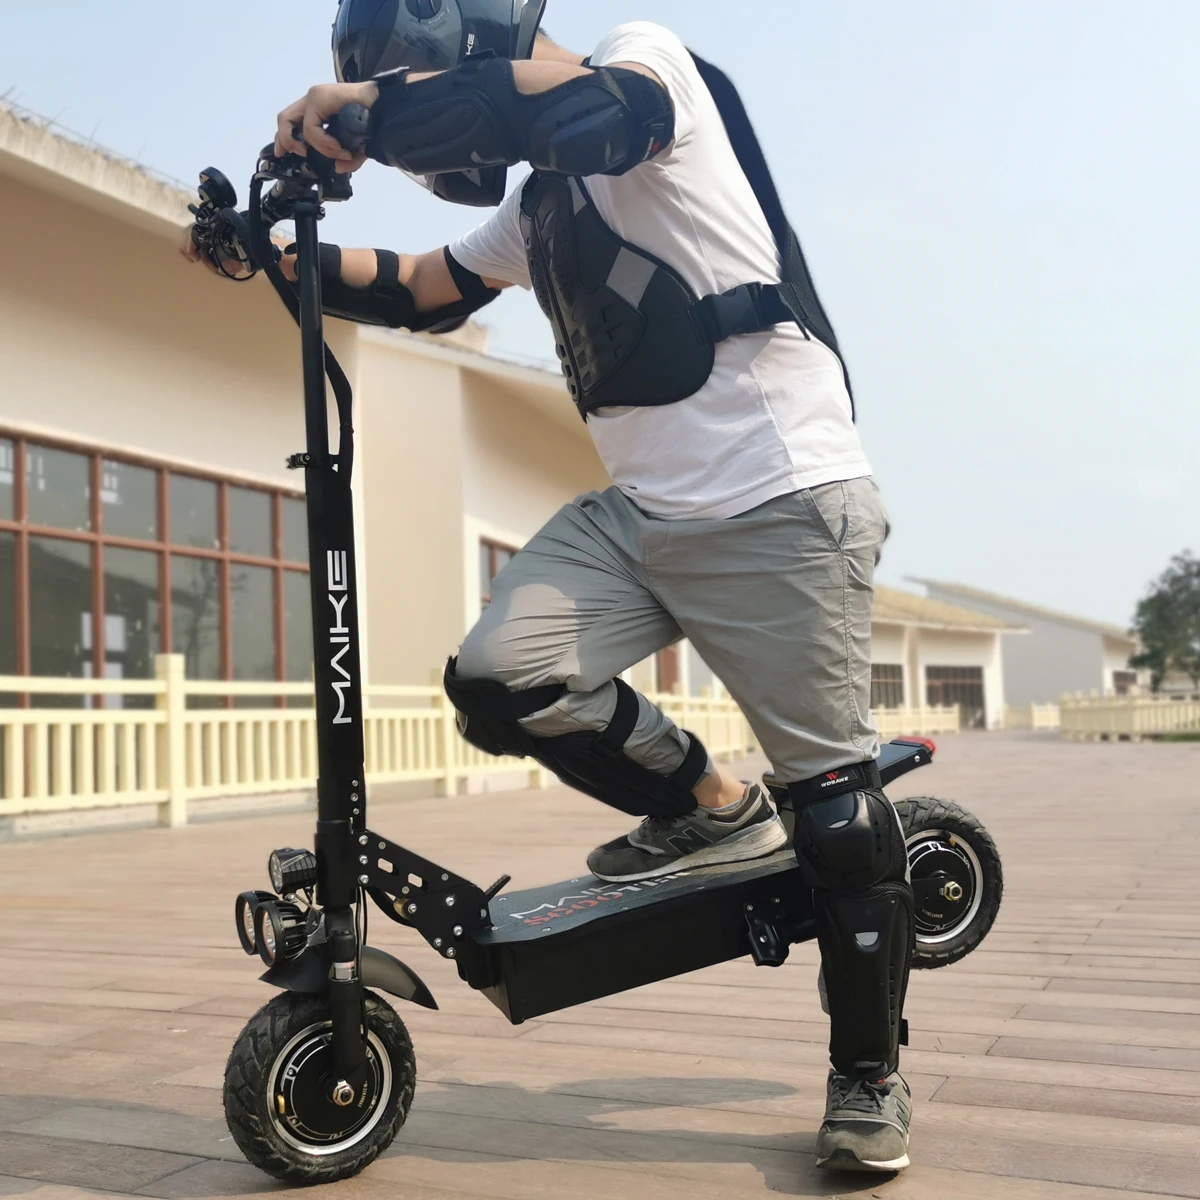 

China Best Price maike mk6 1000w 2000w dual hub electric scooter off road e scooter fast high speed electric scooter for adults